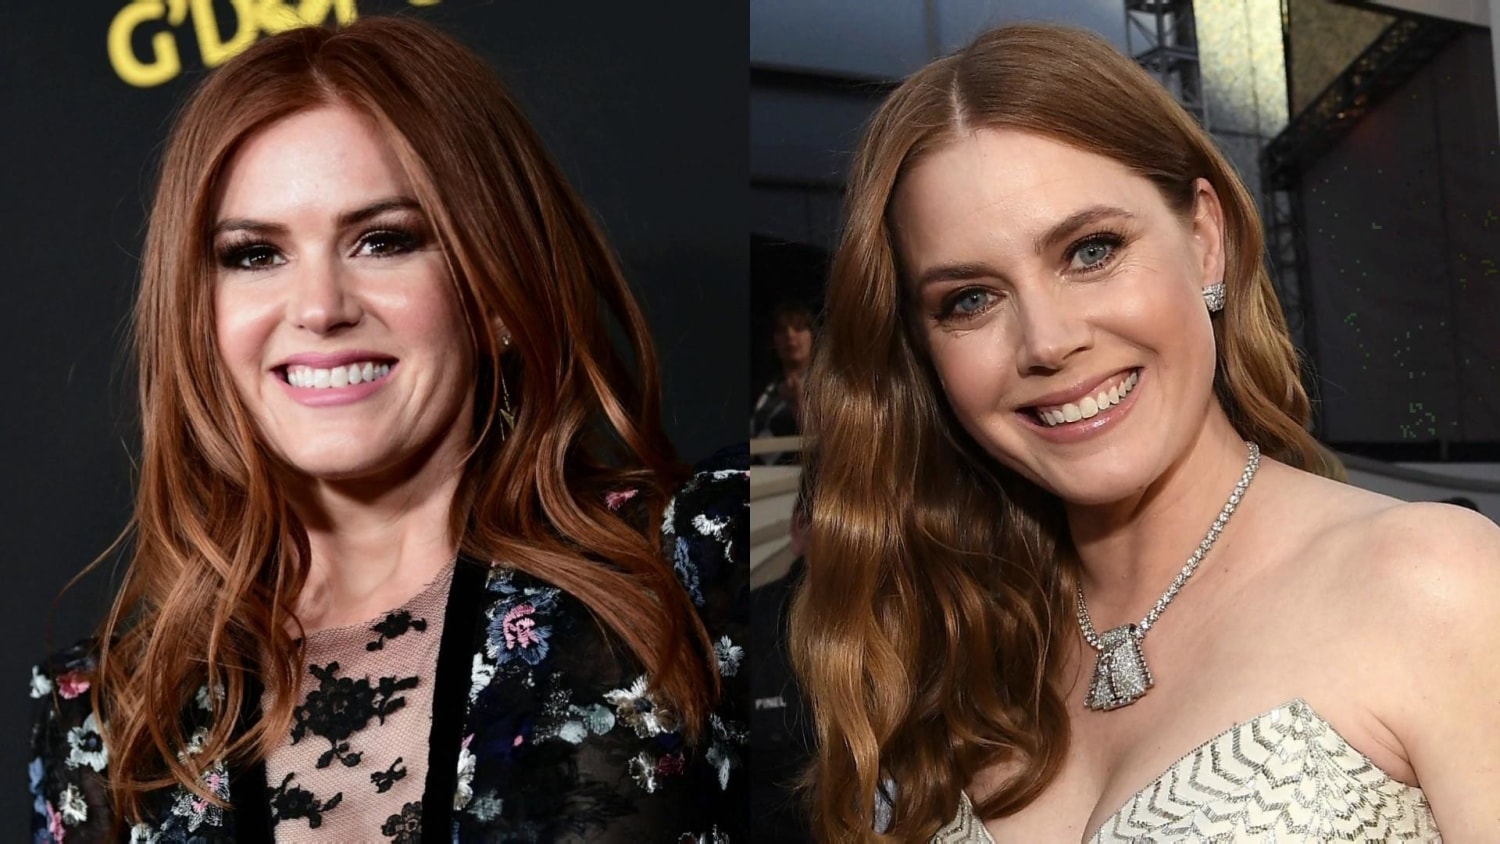 Isla Fisher talks about how she gets mistaken for Amy Adams